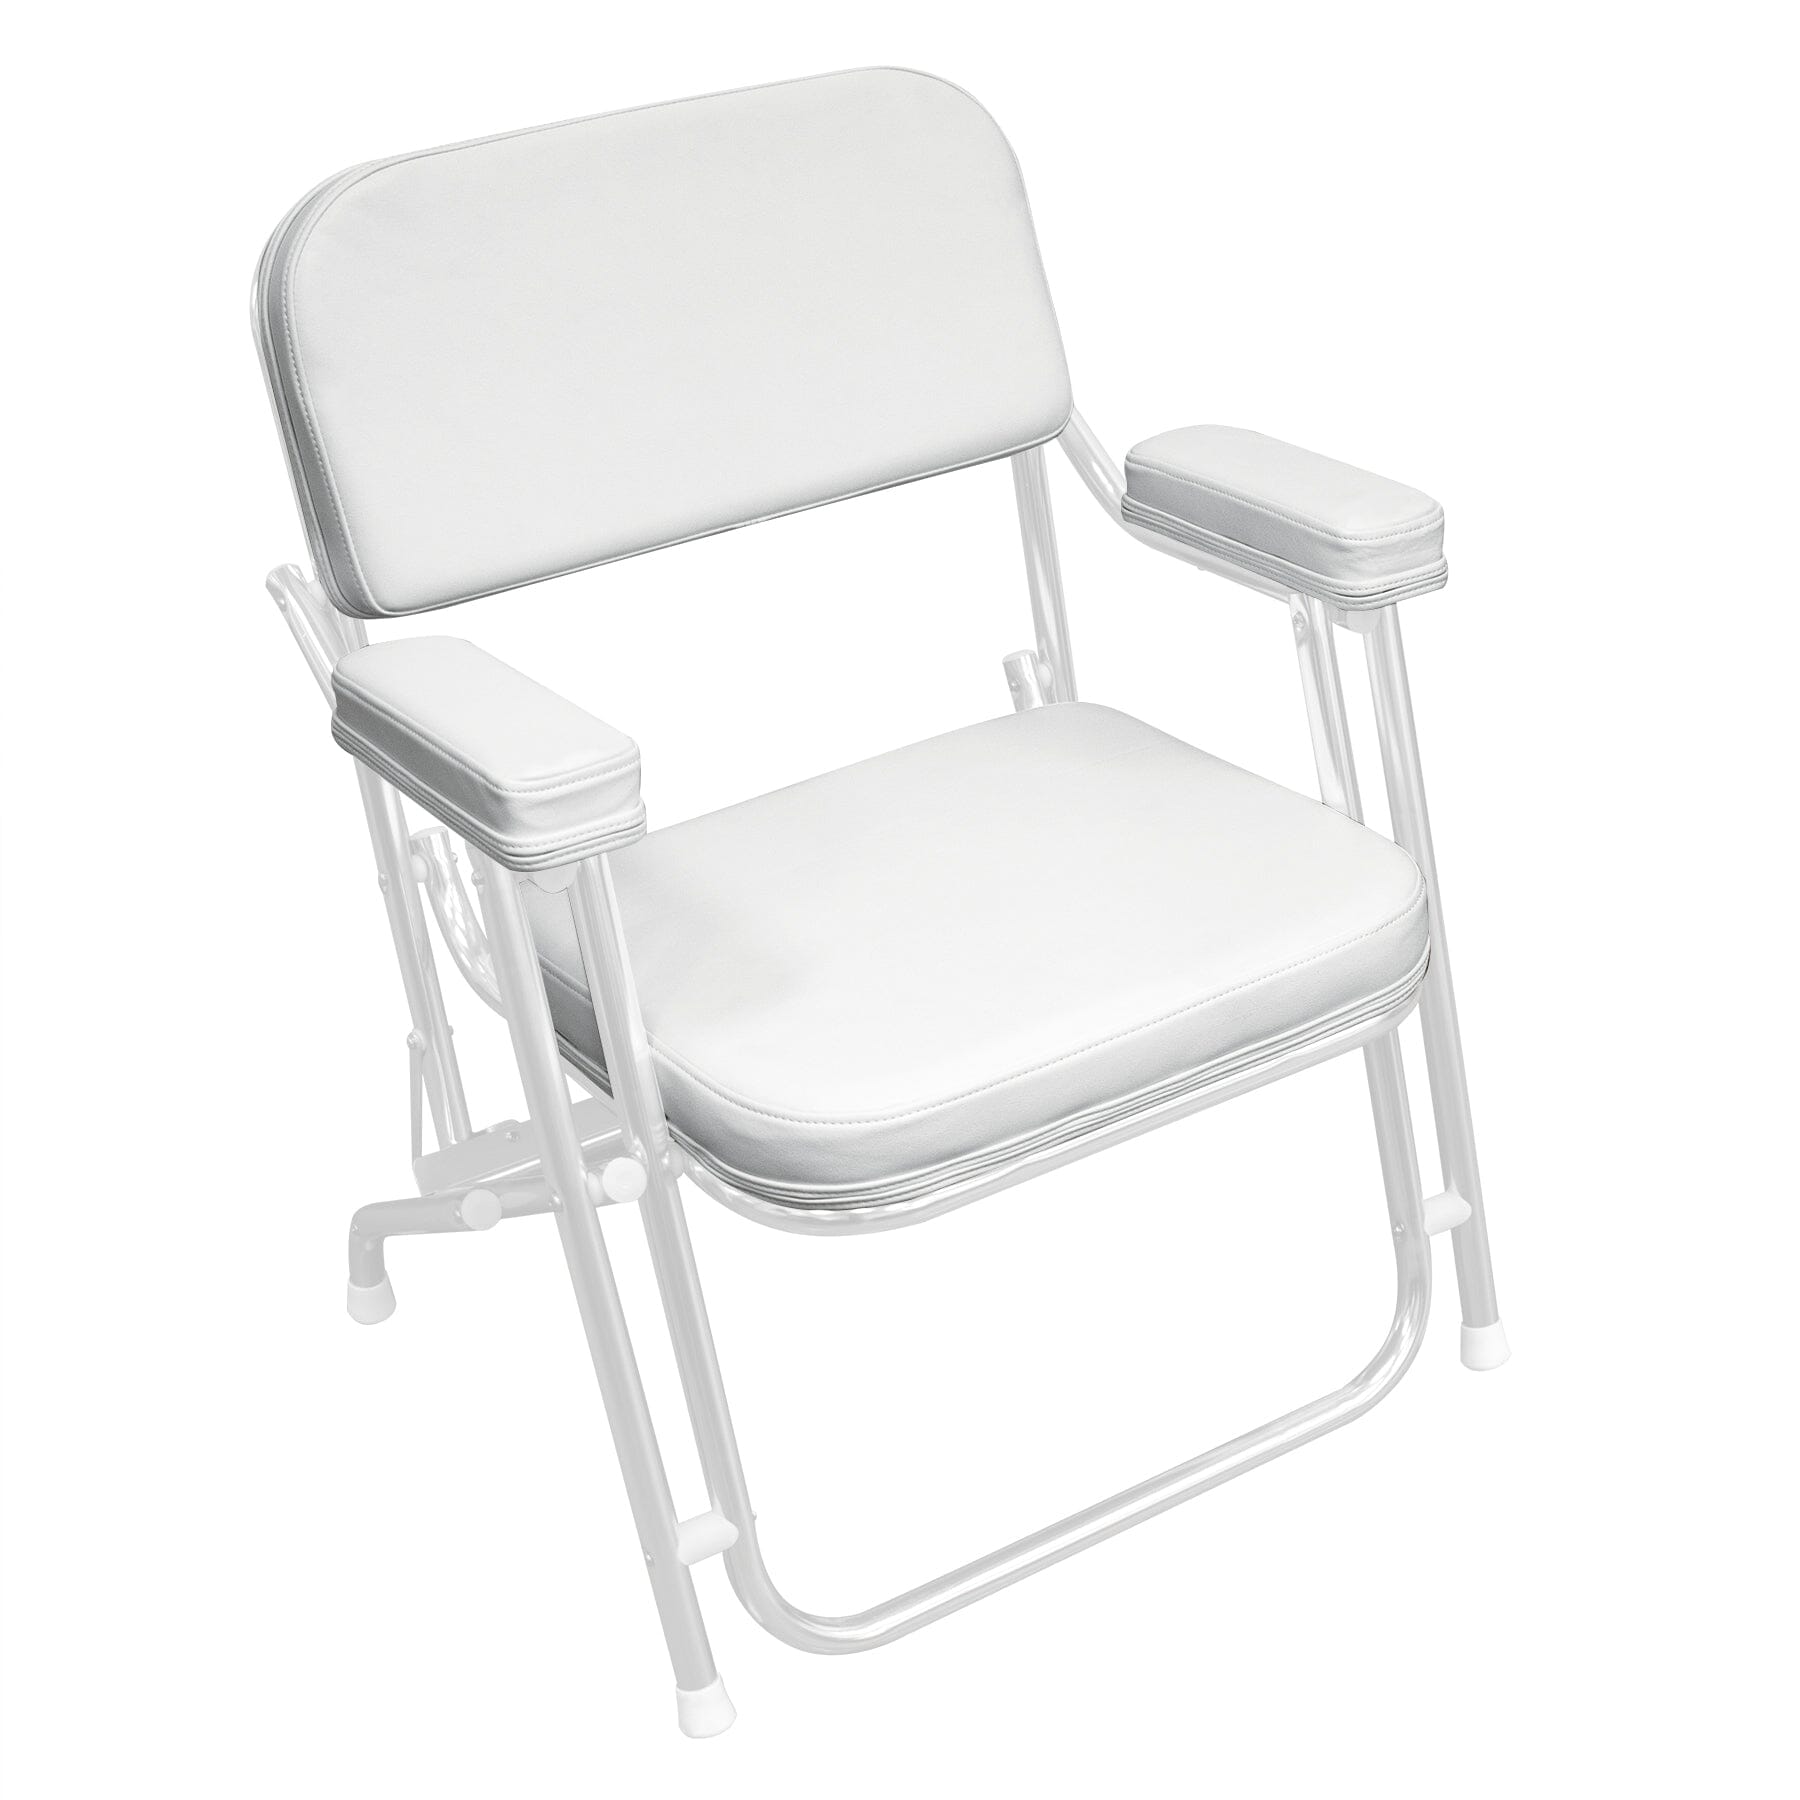 Replacement Cushion for Resin Folding Chairs